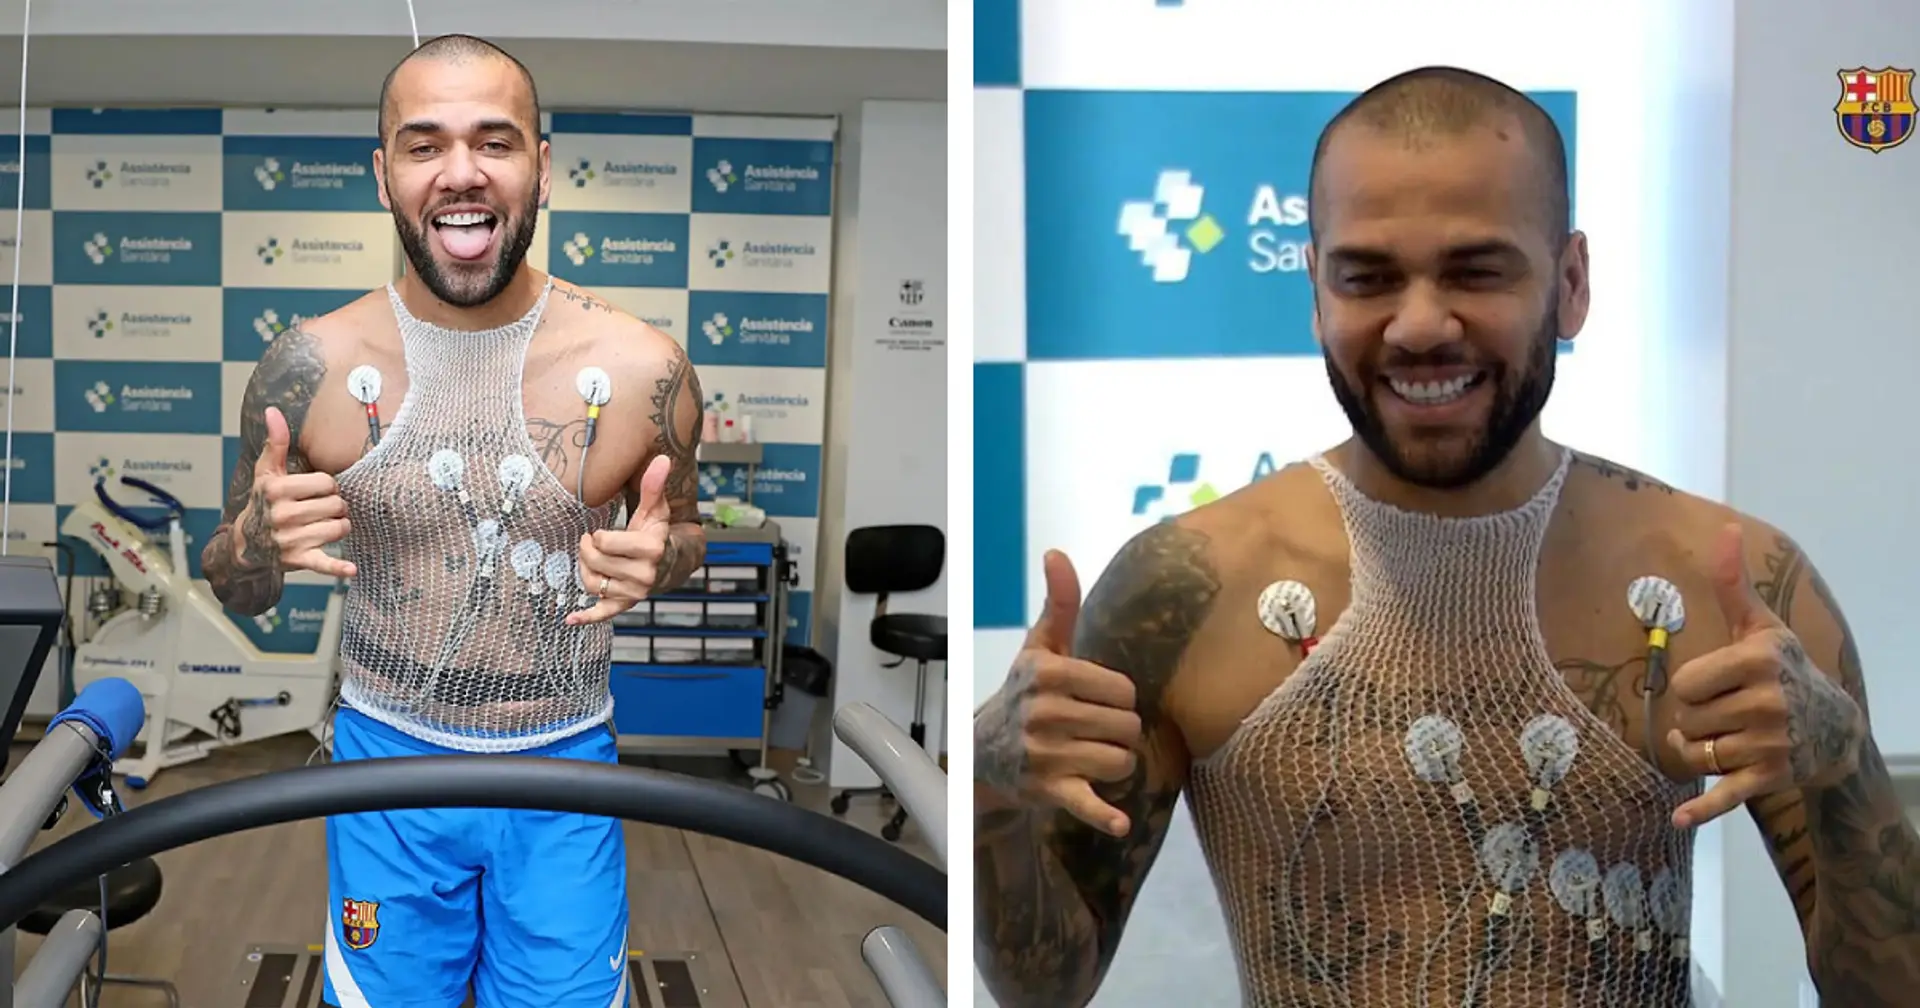 Dani Alves passes Barcelona medical — but Brazilian won't be able to play for almost 2 months